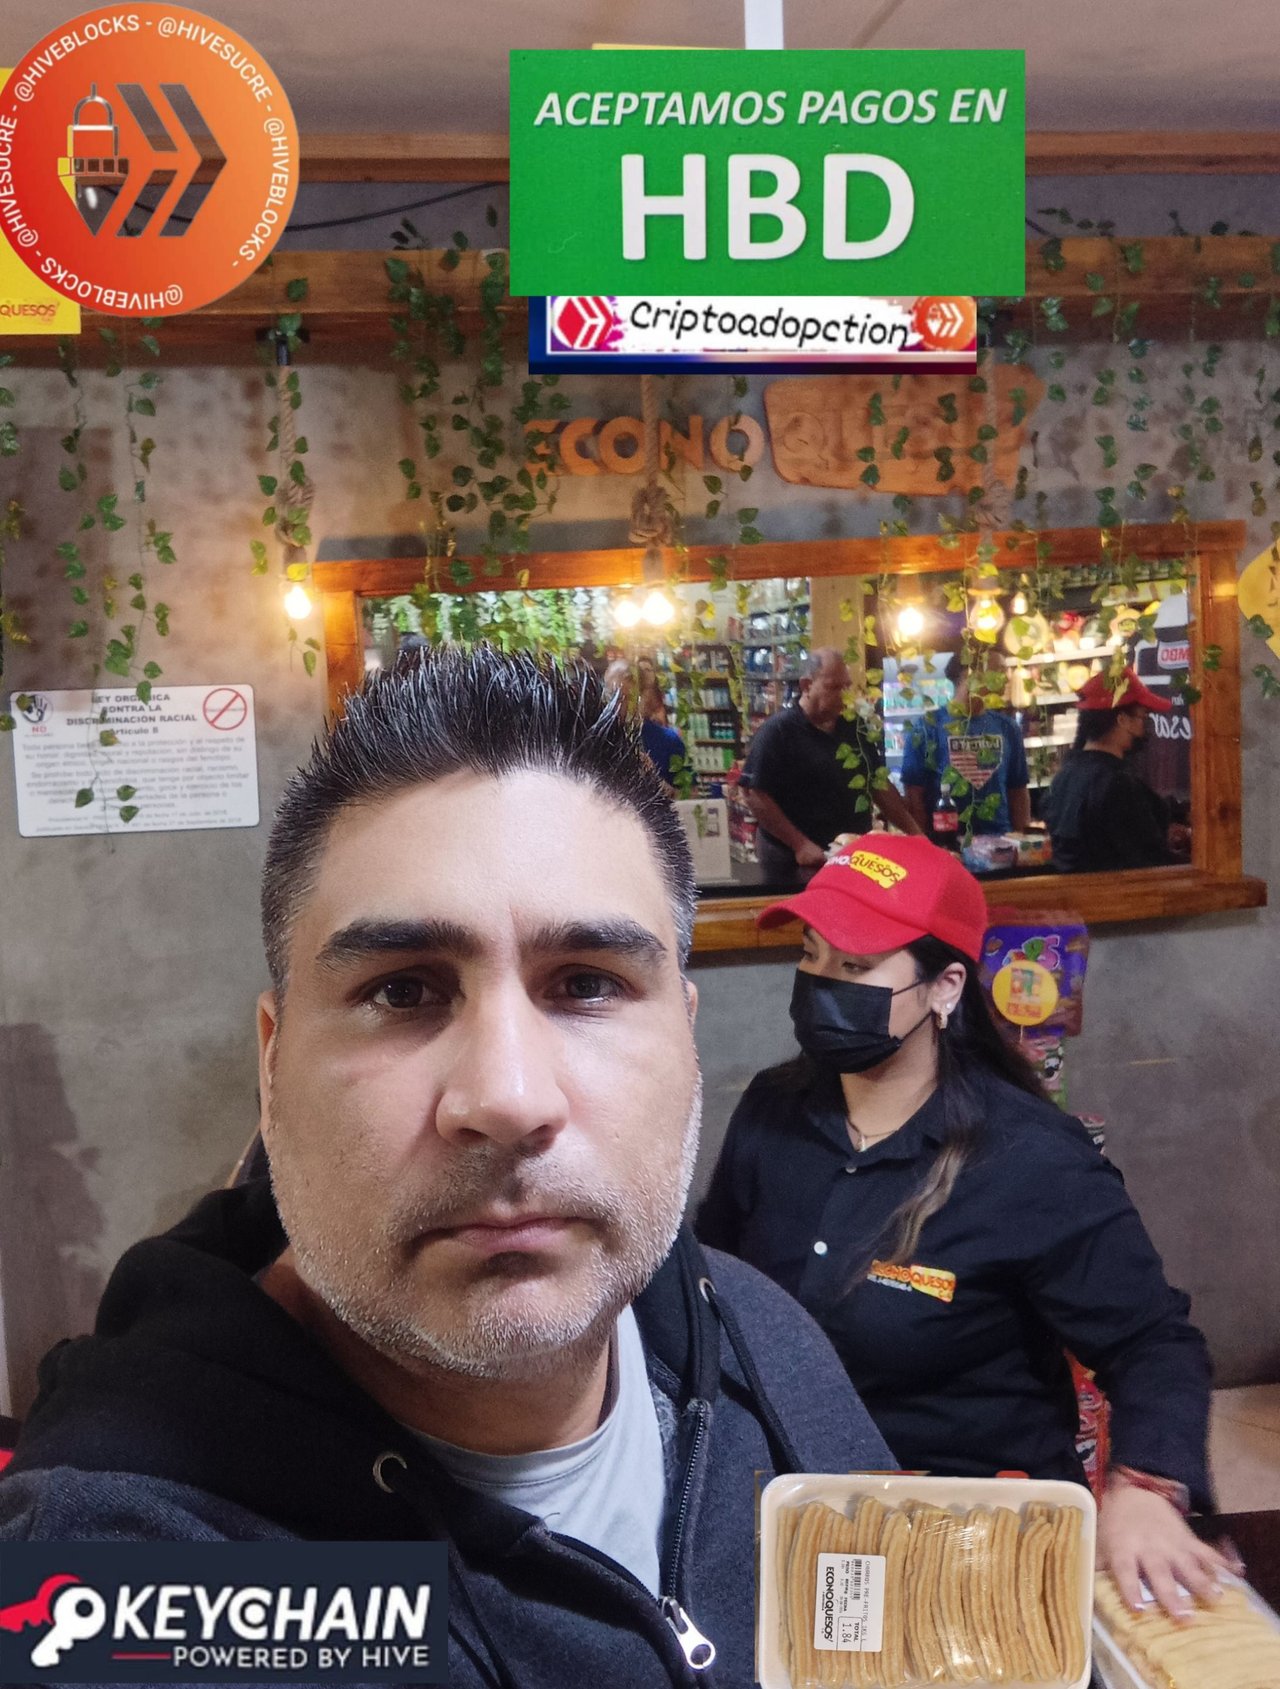 Promoting crypto adoption in Sucre state with a successful purchase with my hbd ✔️🛍️